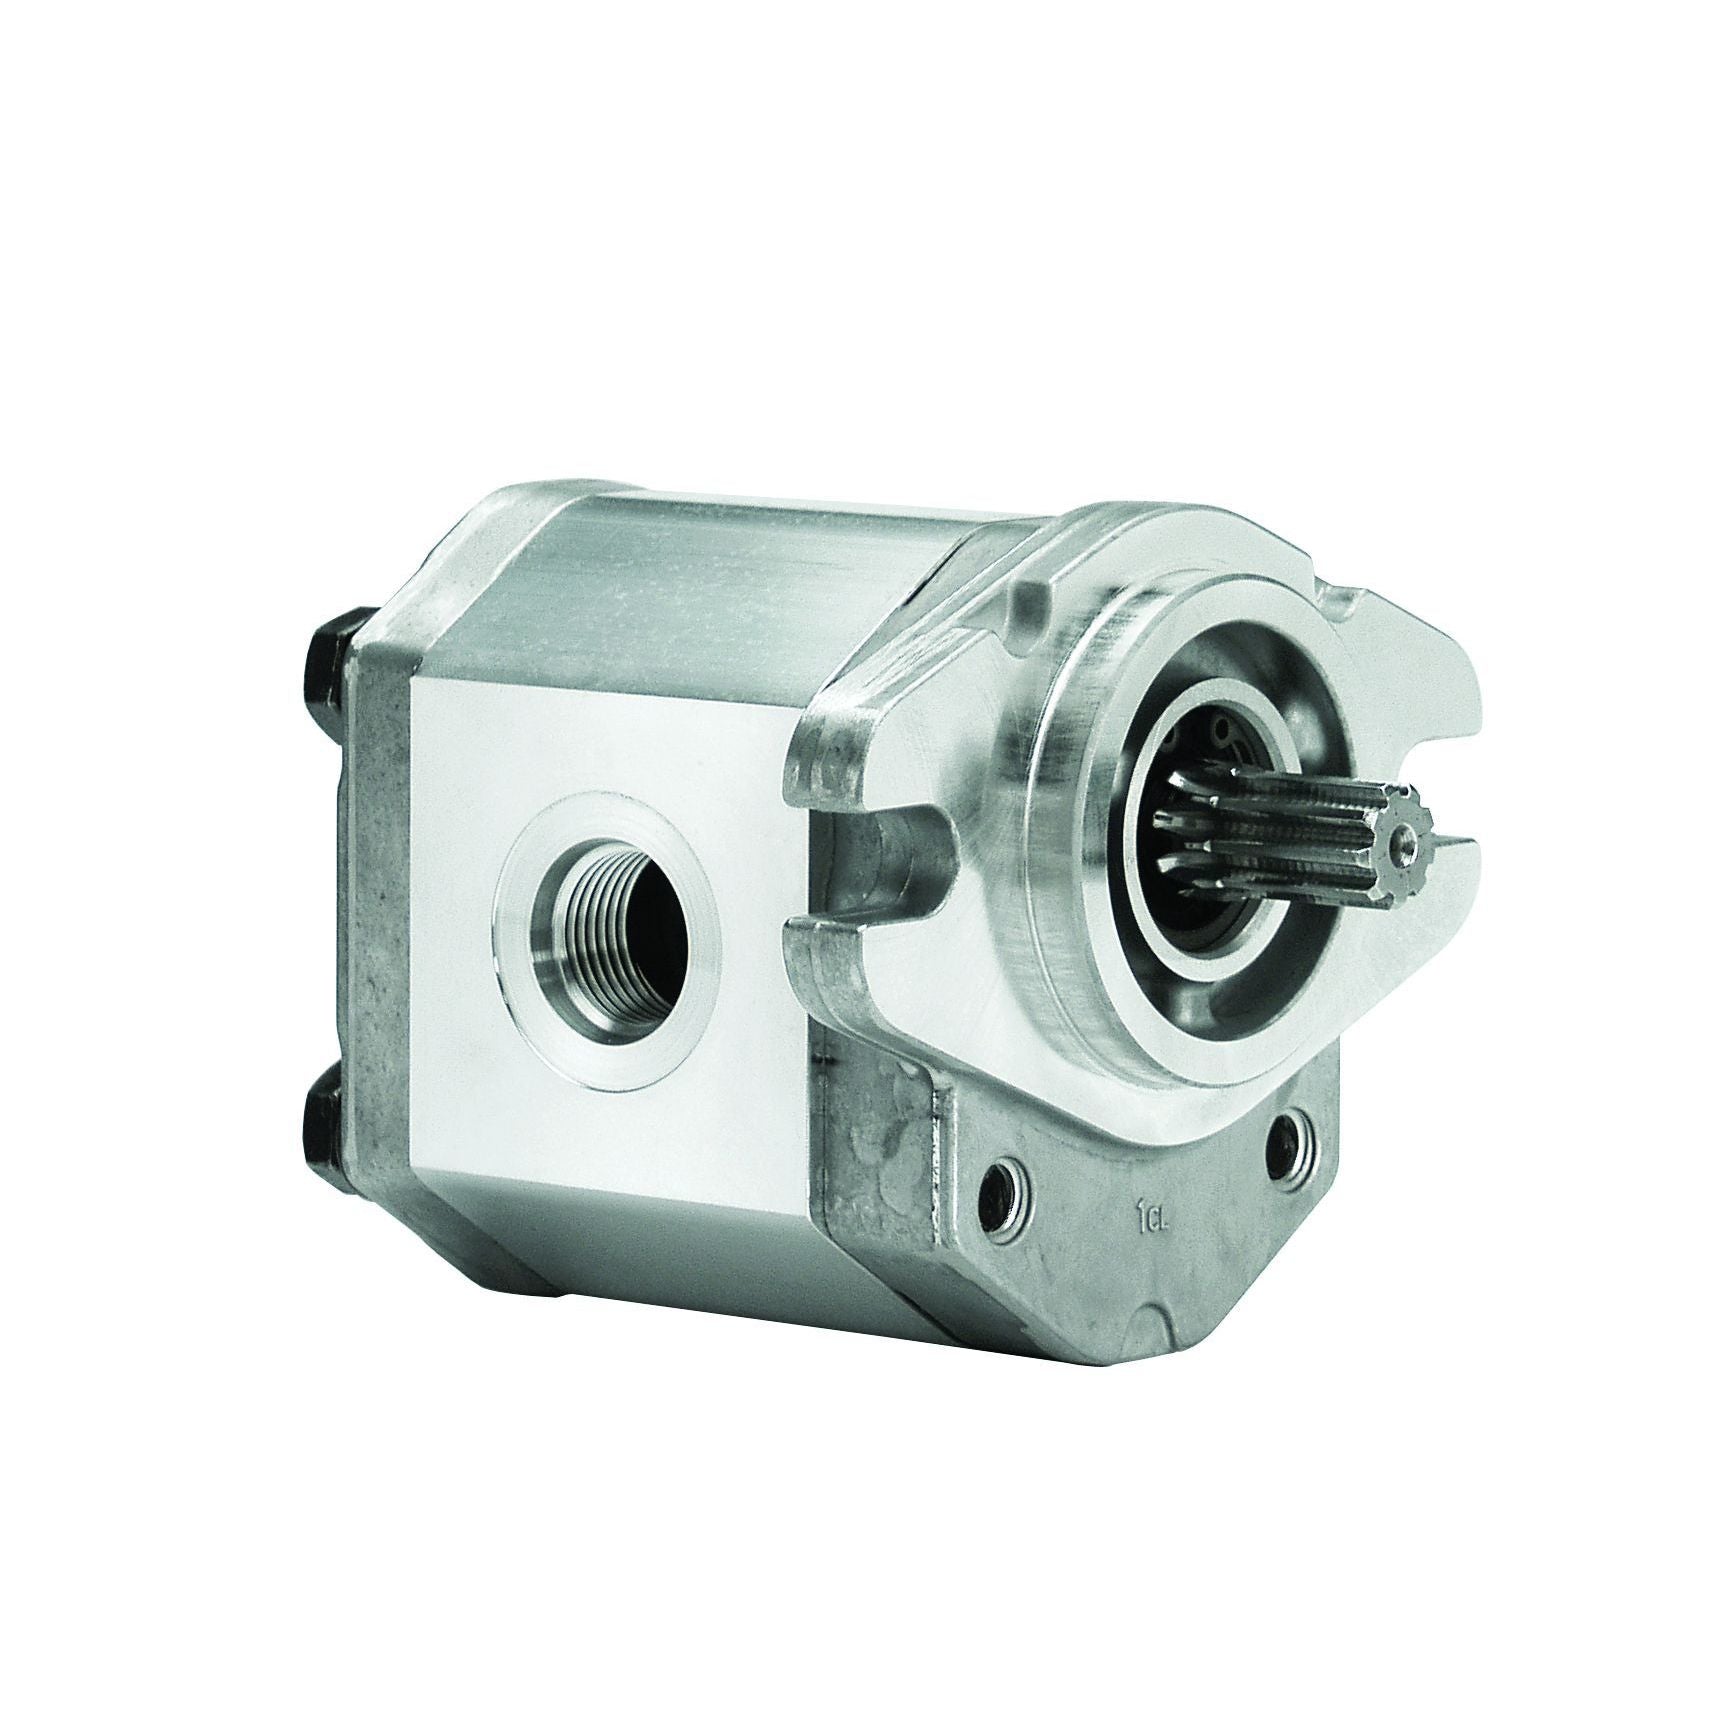 ALP3A-S-40-S1-FA : Marzocchi Gear Pump, CCW, 26cc (1.586in3), 12.36 GPM, 3335psi, 3300 RPM, #16 SAE (1") In, #12 SAE (3/4") Out, Splined Shaft 13T 16/32DP, SAE B 2-Bolt Mount